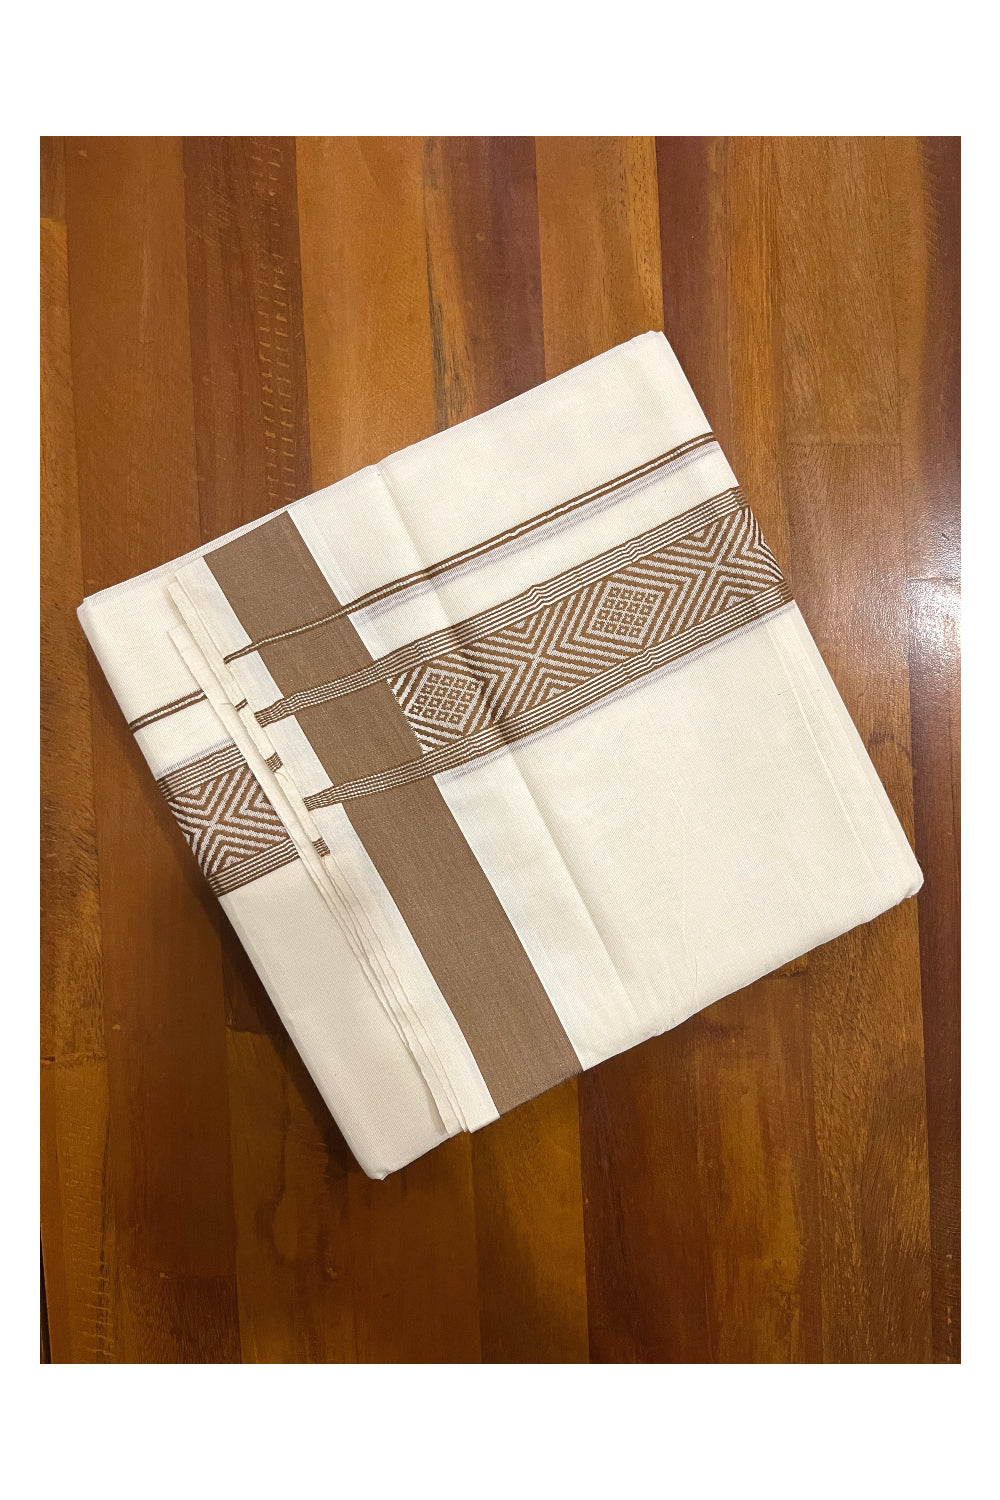 Pure Cotton Off White Double Mundu with Silver Kasavu and Brown Woven Border (South Indian Dhoti)